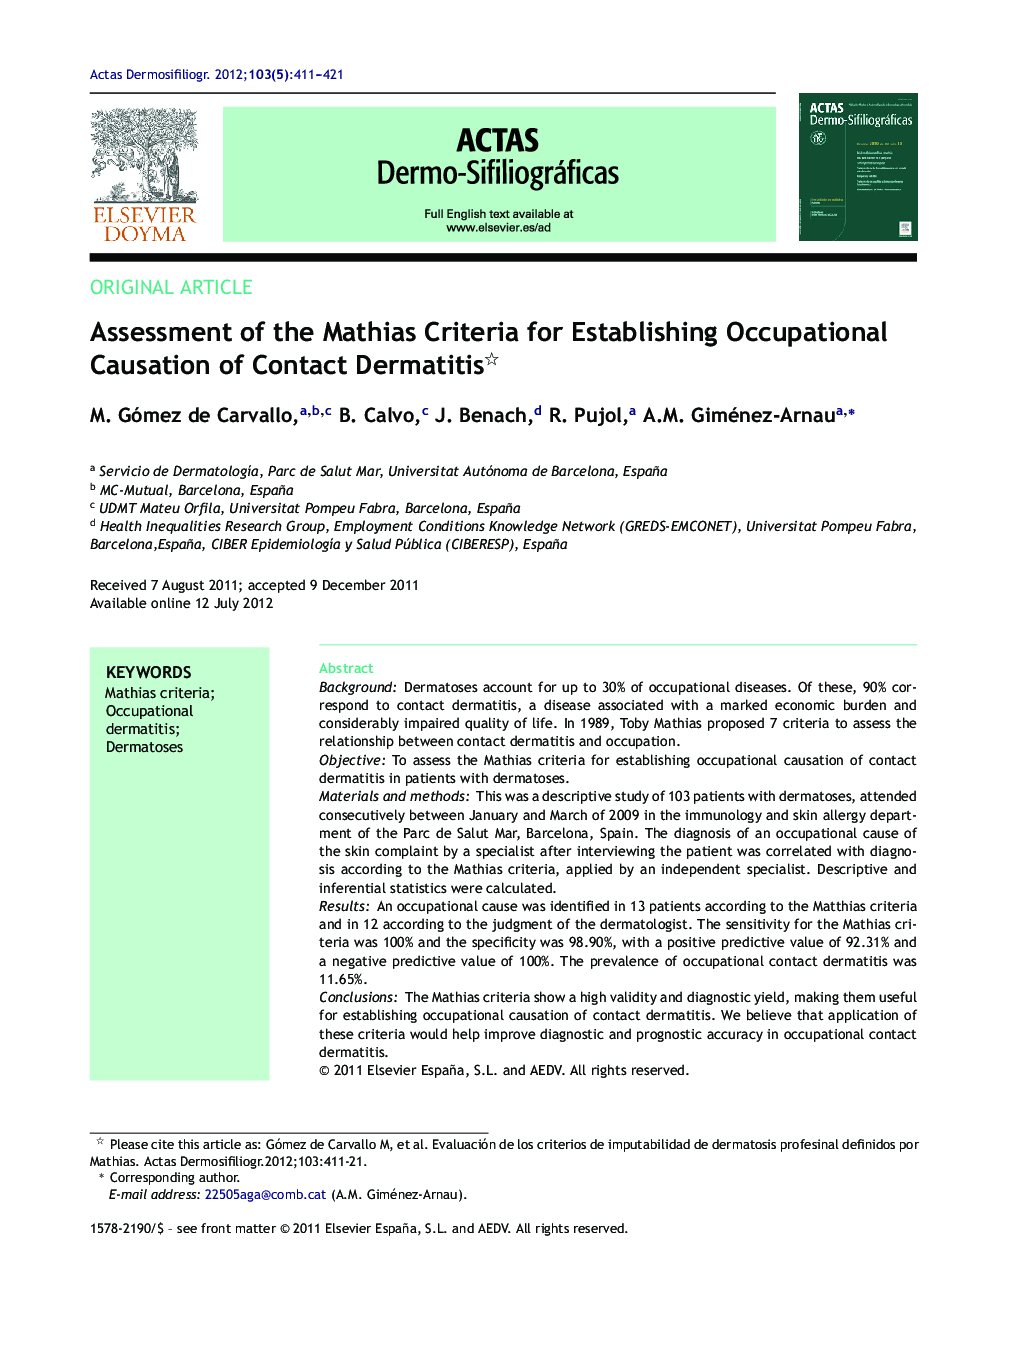 Assessment of the Mathias Criteria for Establishing Occupational Causation of Contact Dermatitis 